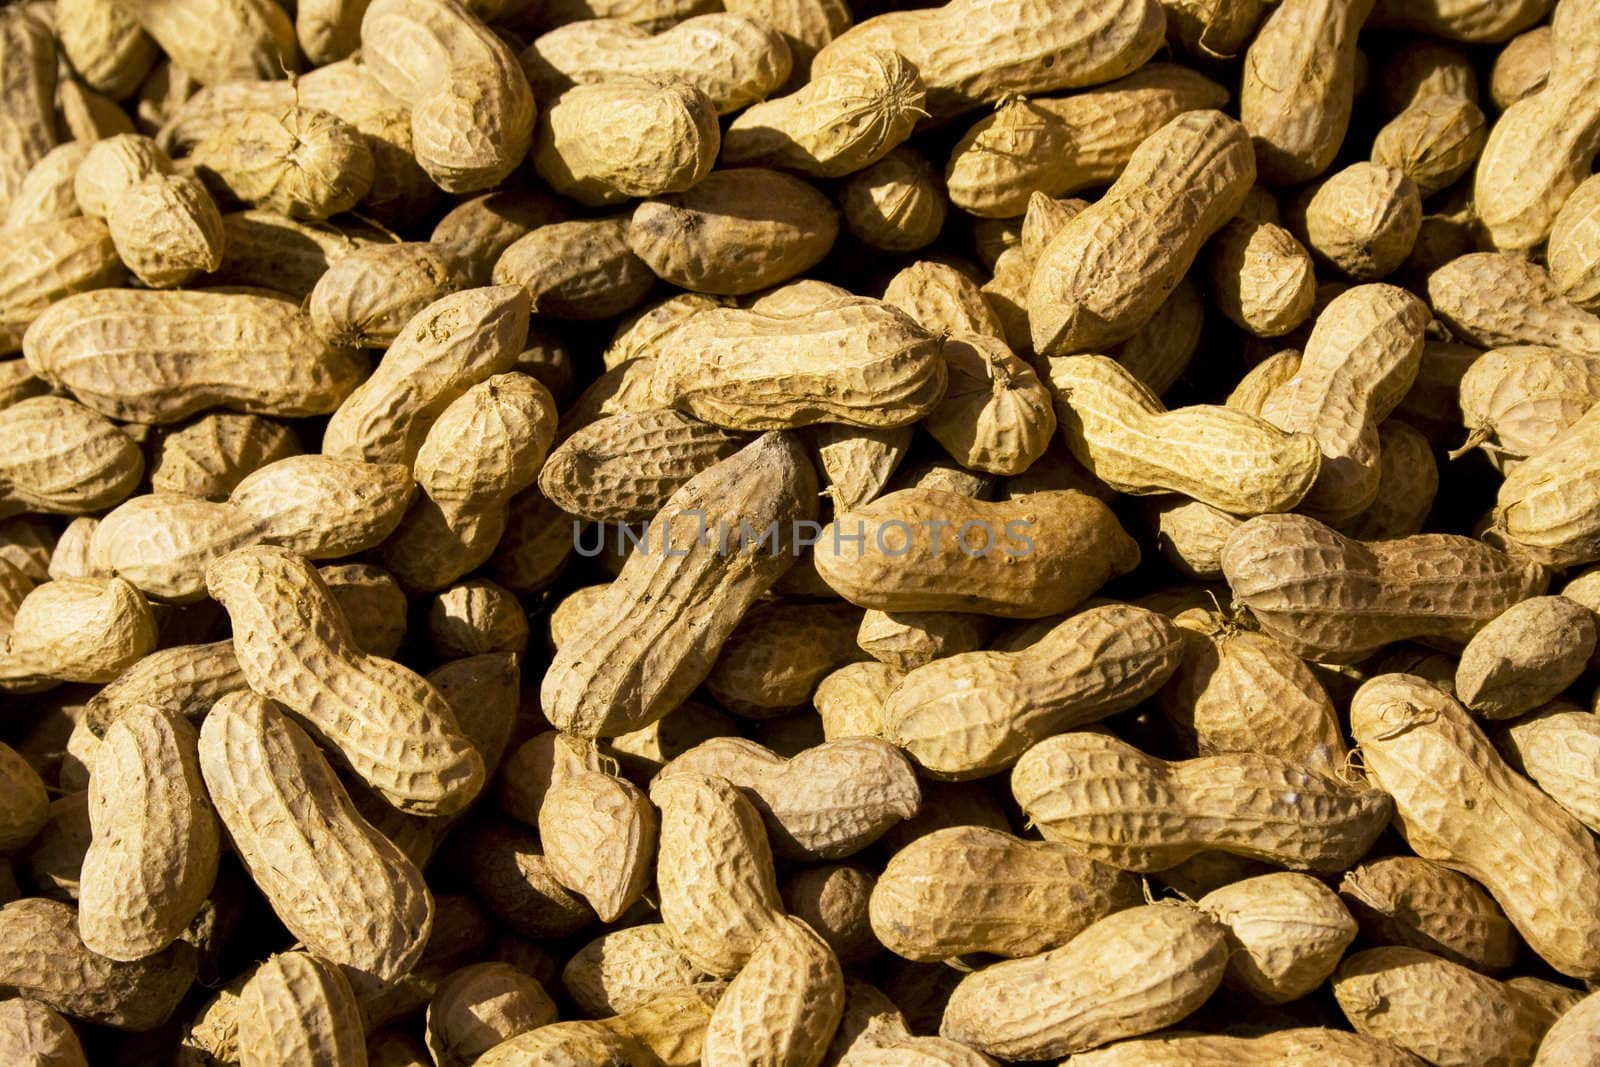 Lot of peanut can use as background in design.